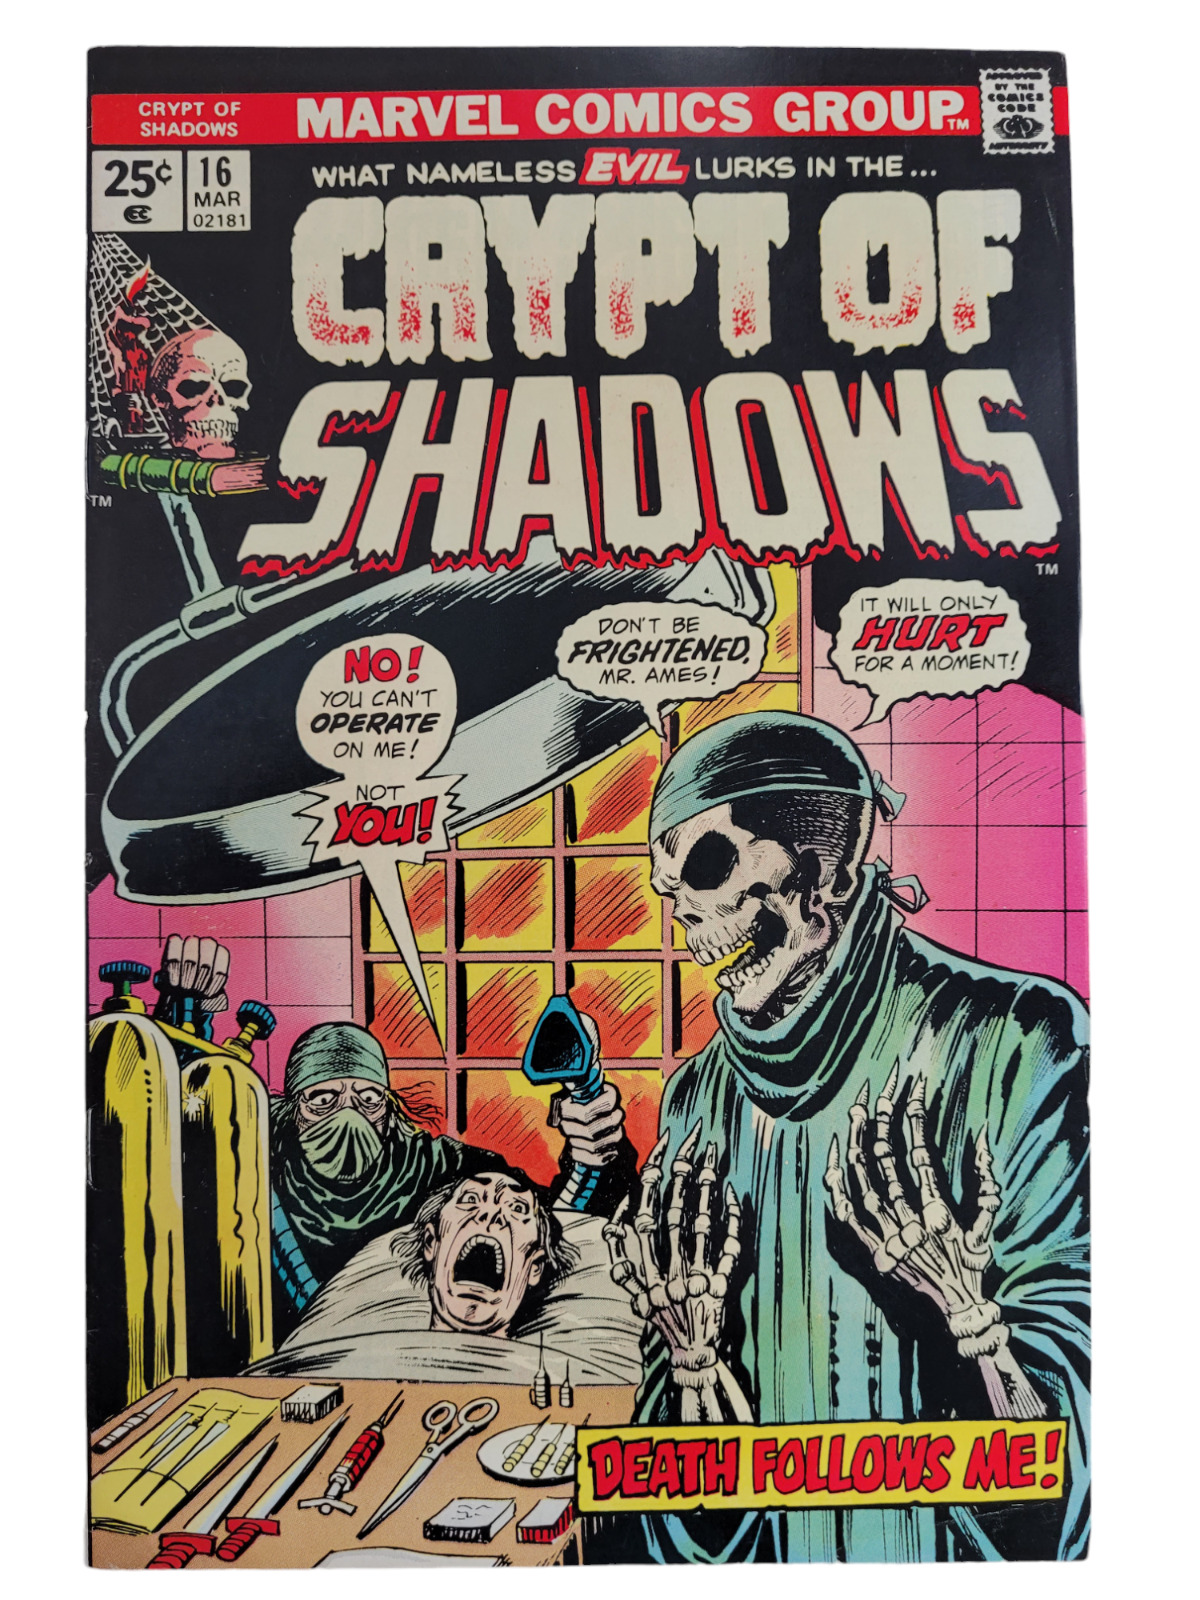 Crypt of Shadows #16 Marvel 1975 Vintage Horror Raw FN+ / FN/VF OR BETTER